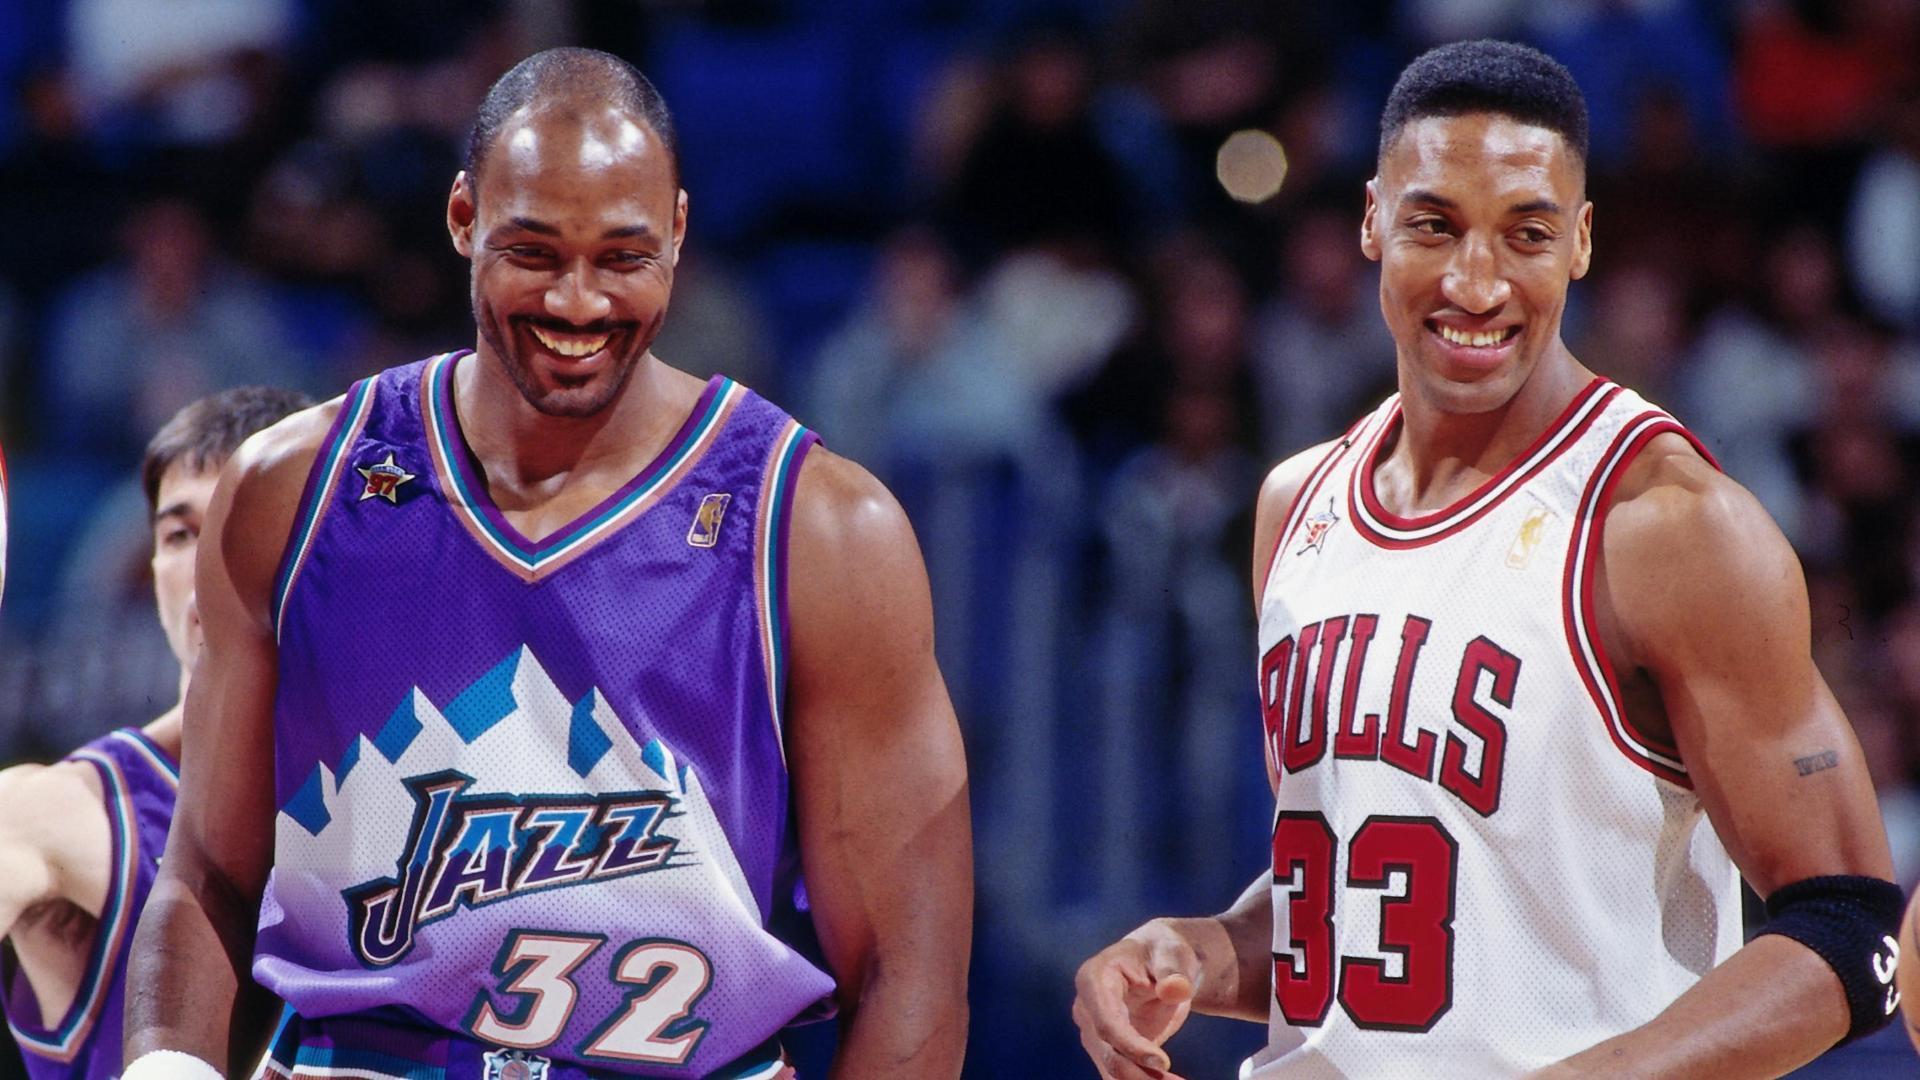 Before The Last Dance, Scottie Pippen delivered six words of trash talk that changed NBA history